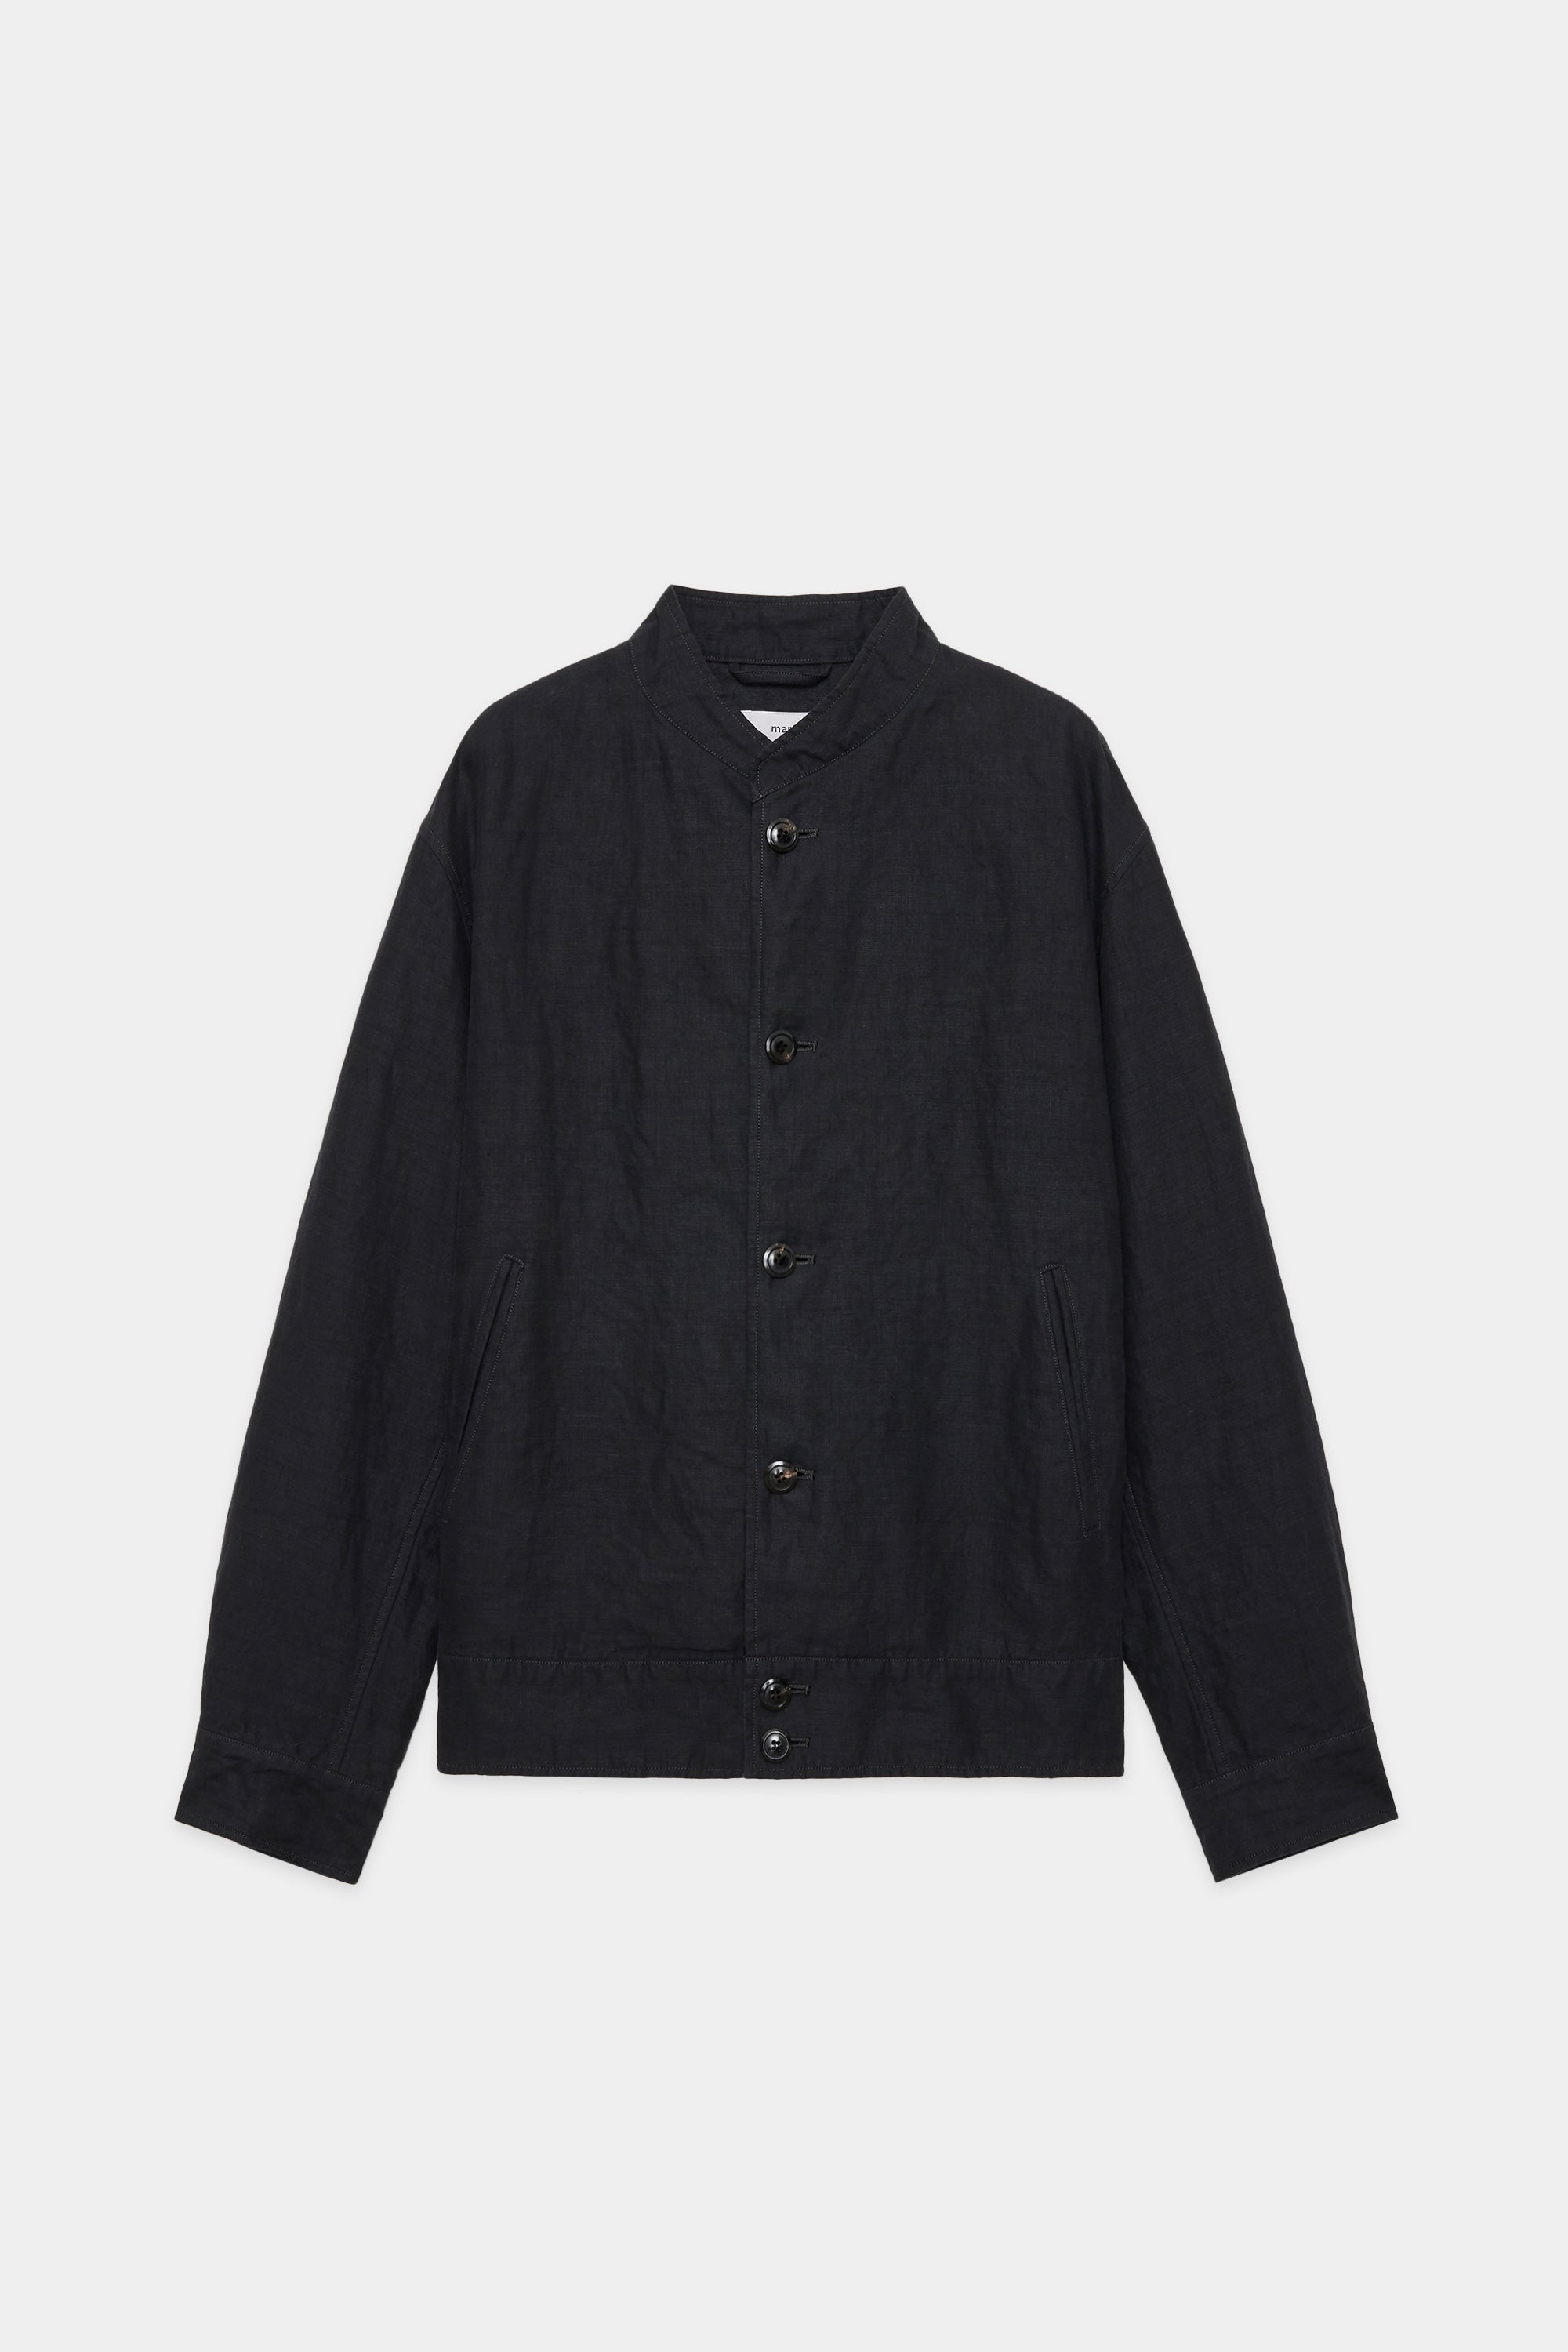 LINEN HIGH COUNT TWILL RIDING JACKET, Black